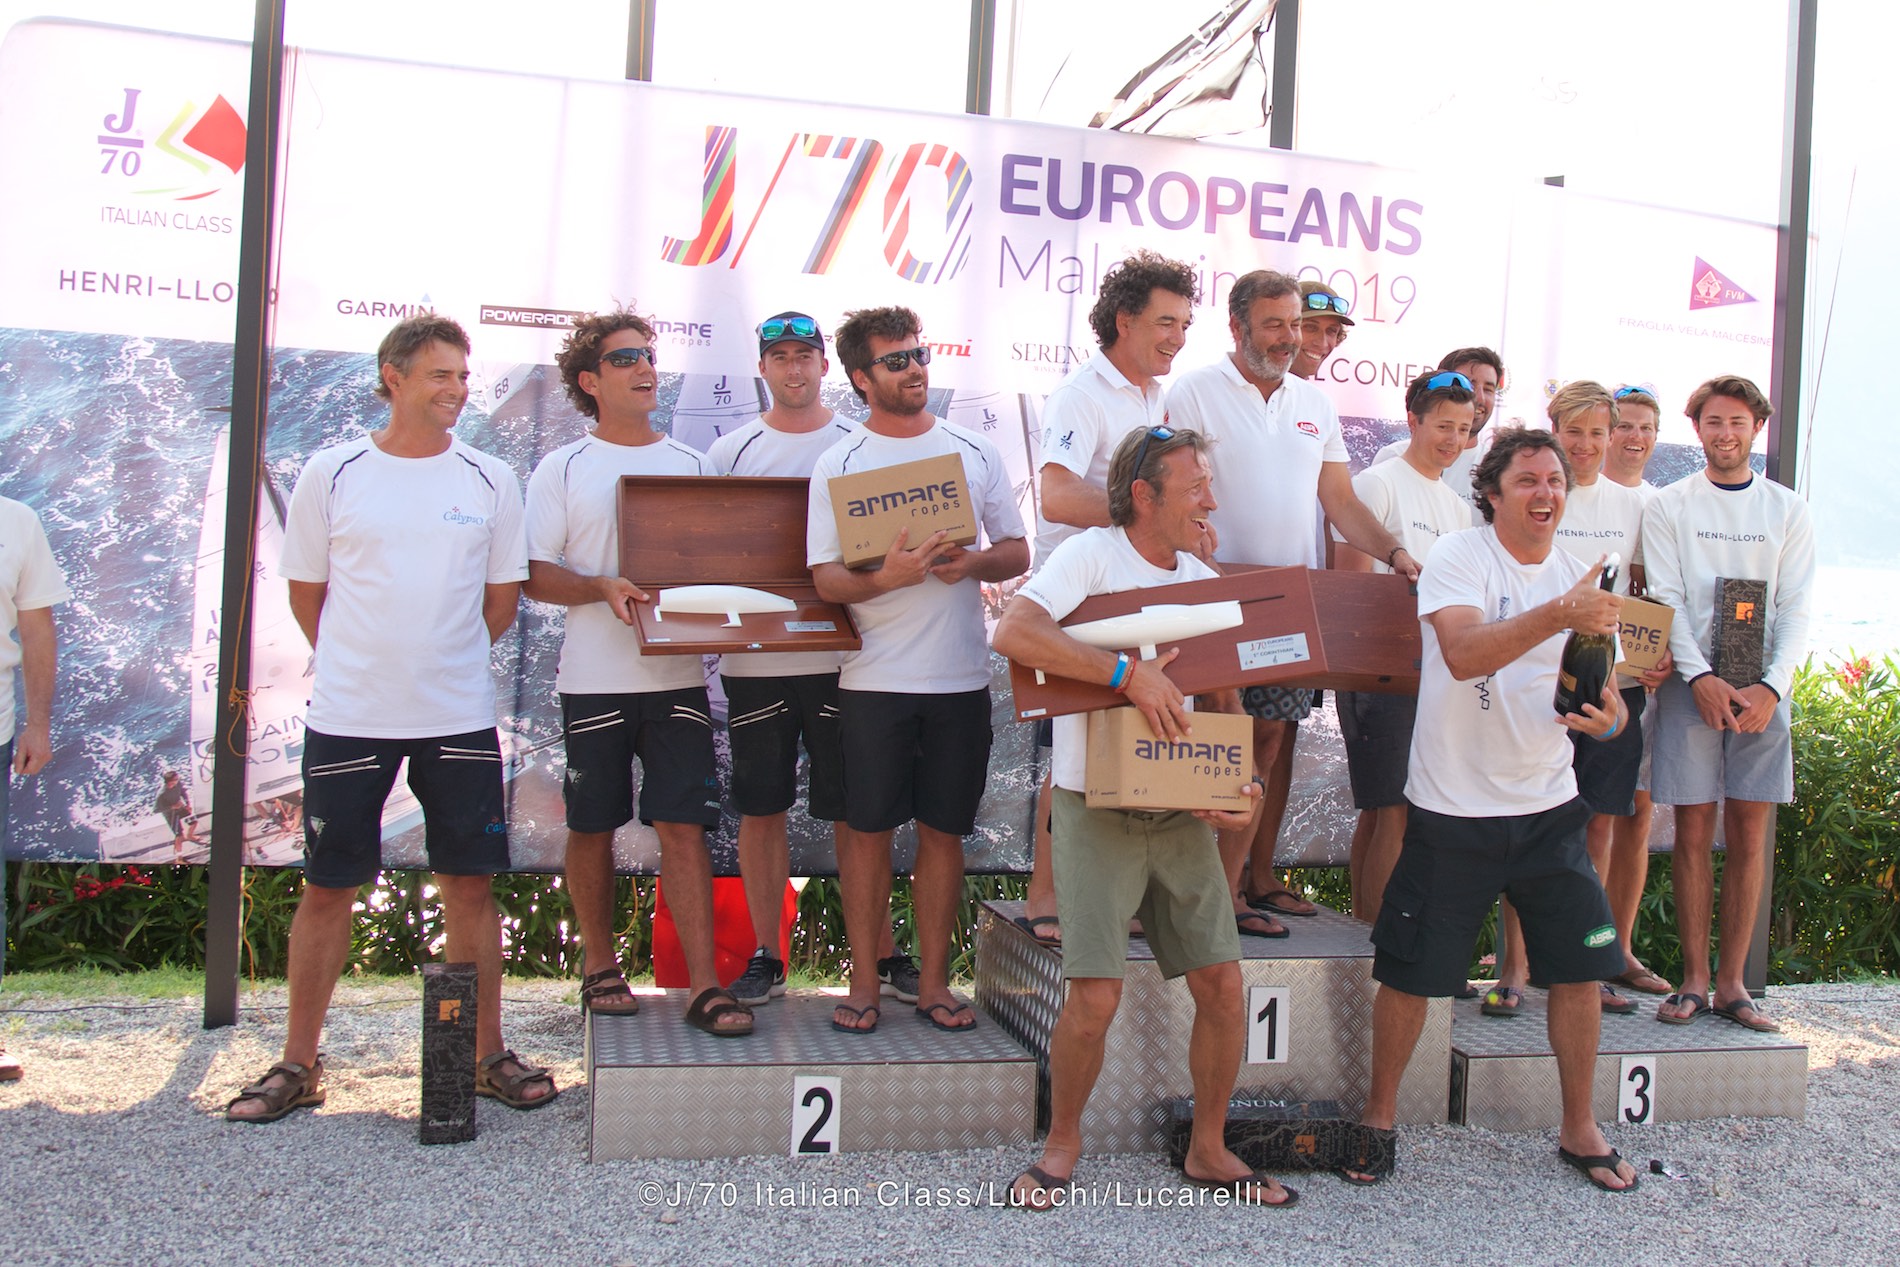 Third place for YCCS Member Roversi at J/70 Europeans - News - Yacht Club Costa Smeralda